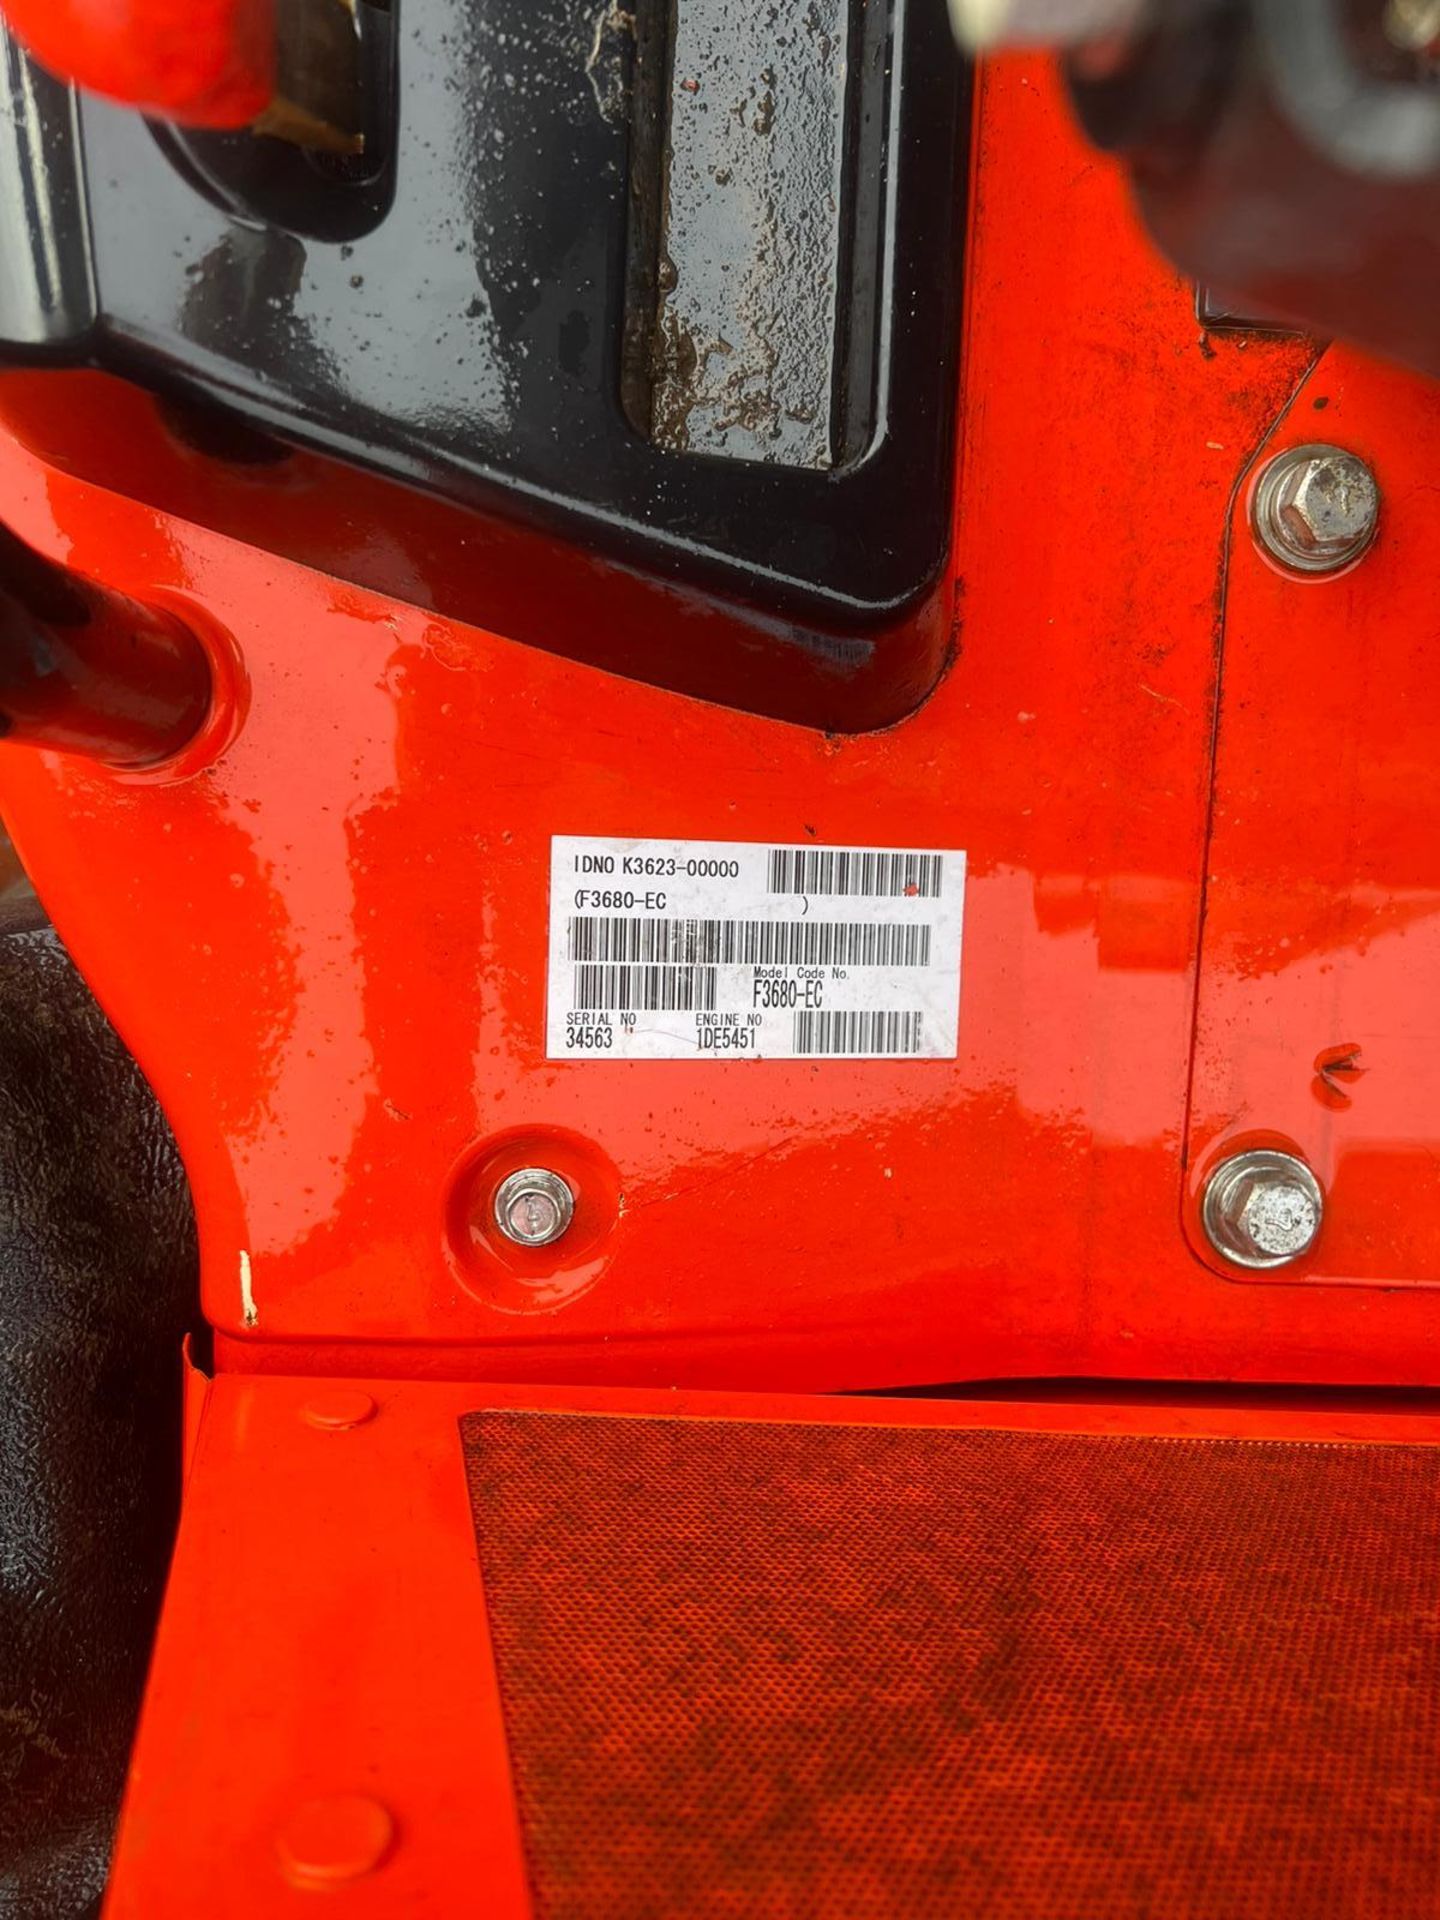 A Kubota F3680-EC 4WD Ride On Mower with 3 blade Mower Deck (one blade missing) and towing hitch, - Image 12 of 13